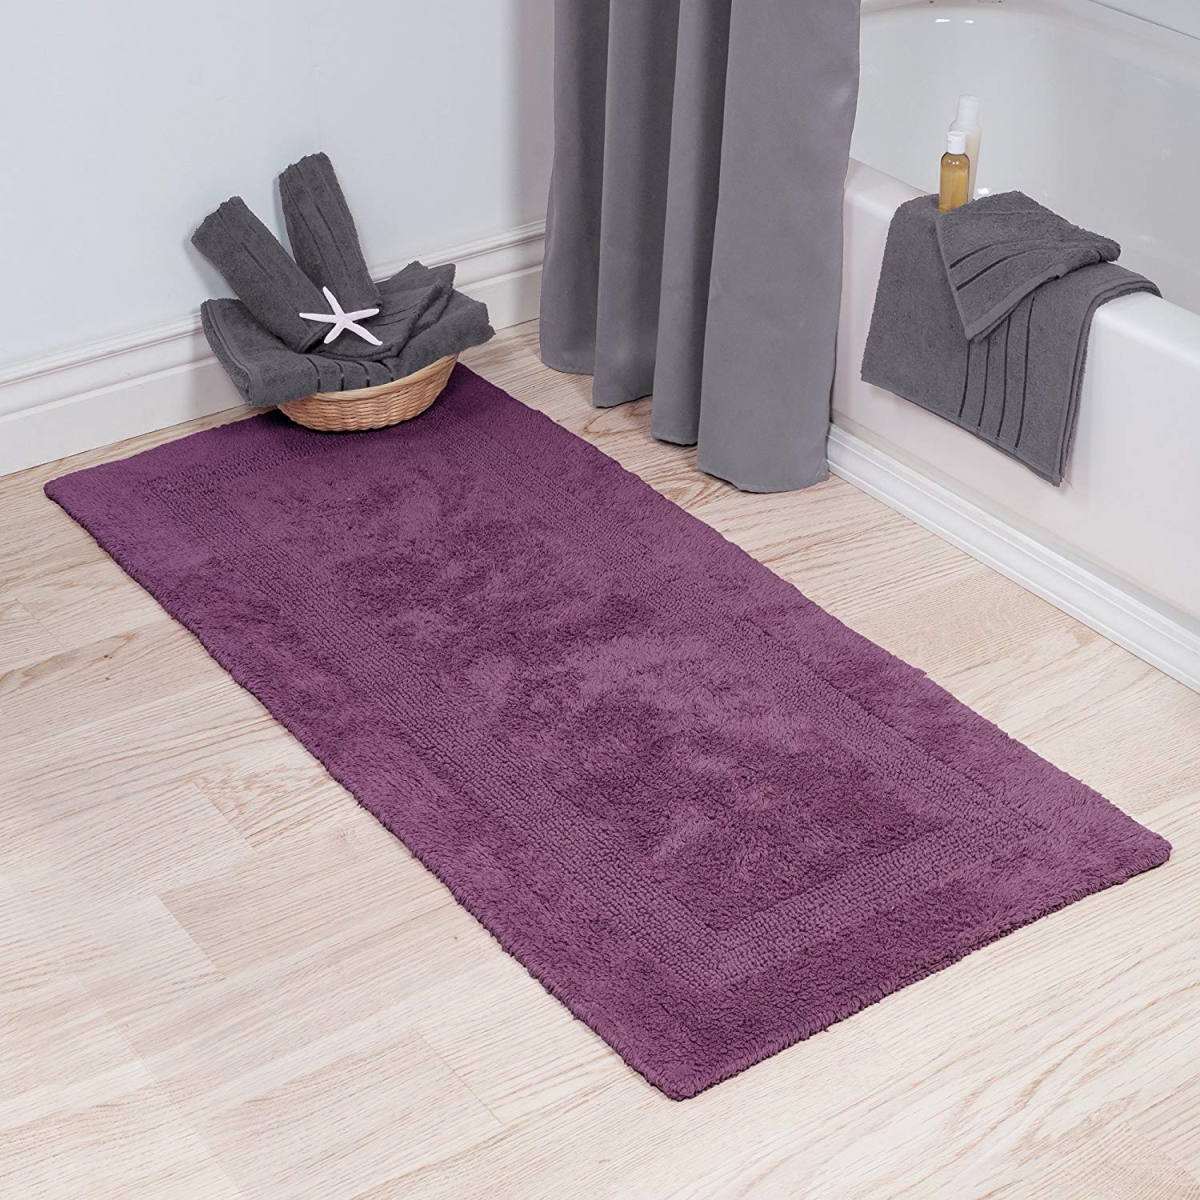 Picture of Bedford Home 69A-04346 100 Percent Cotton Reversible Long Bath Rug - Eggplant - 24 x 60 in.